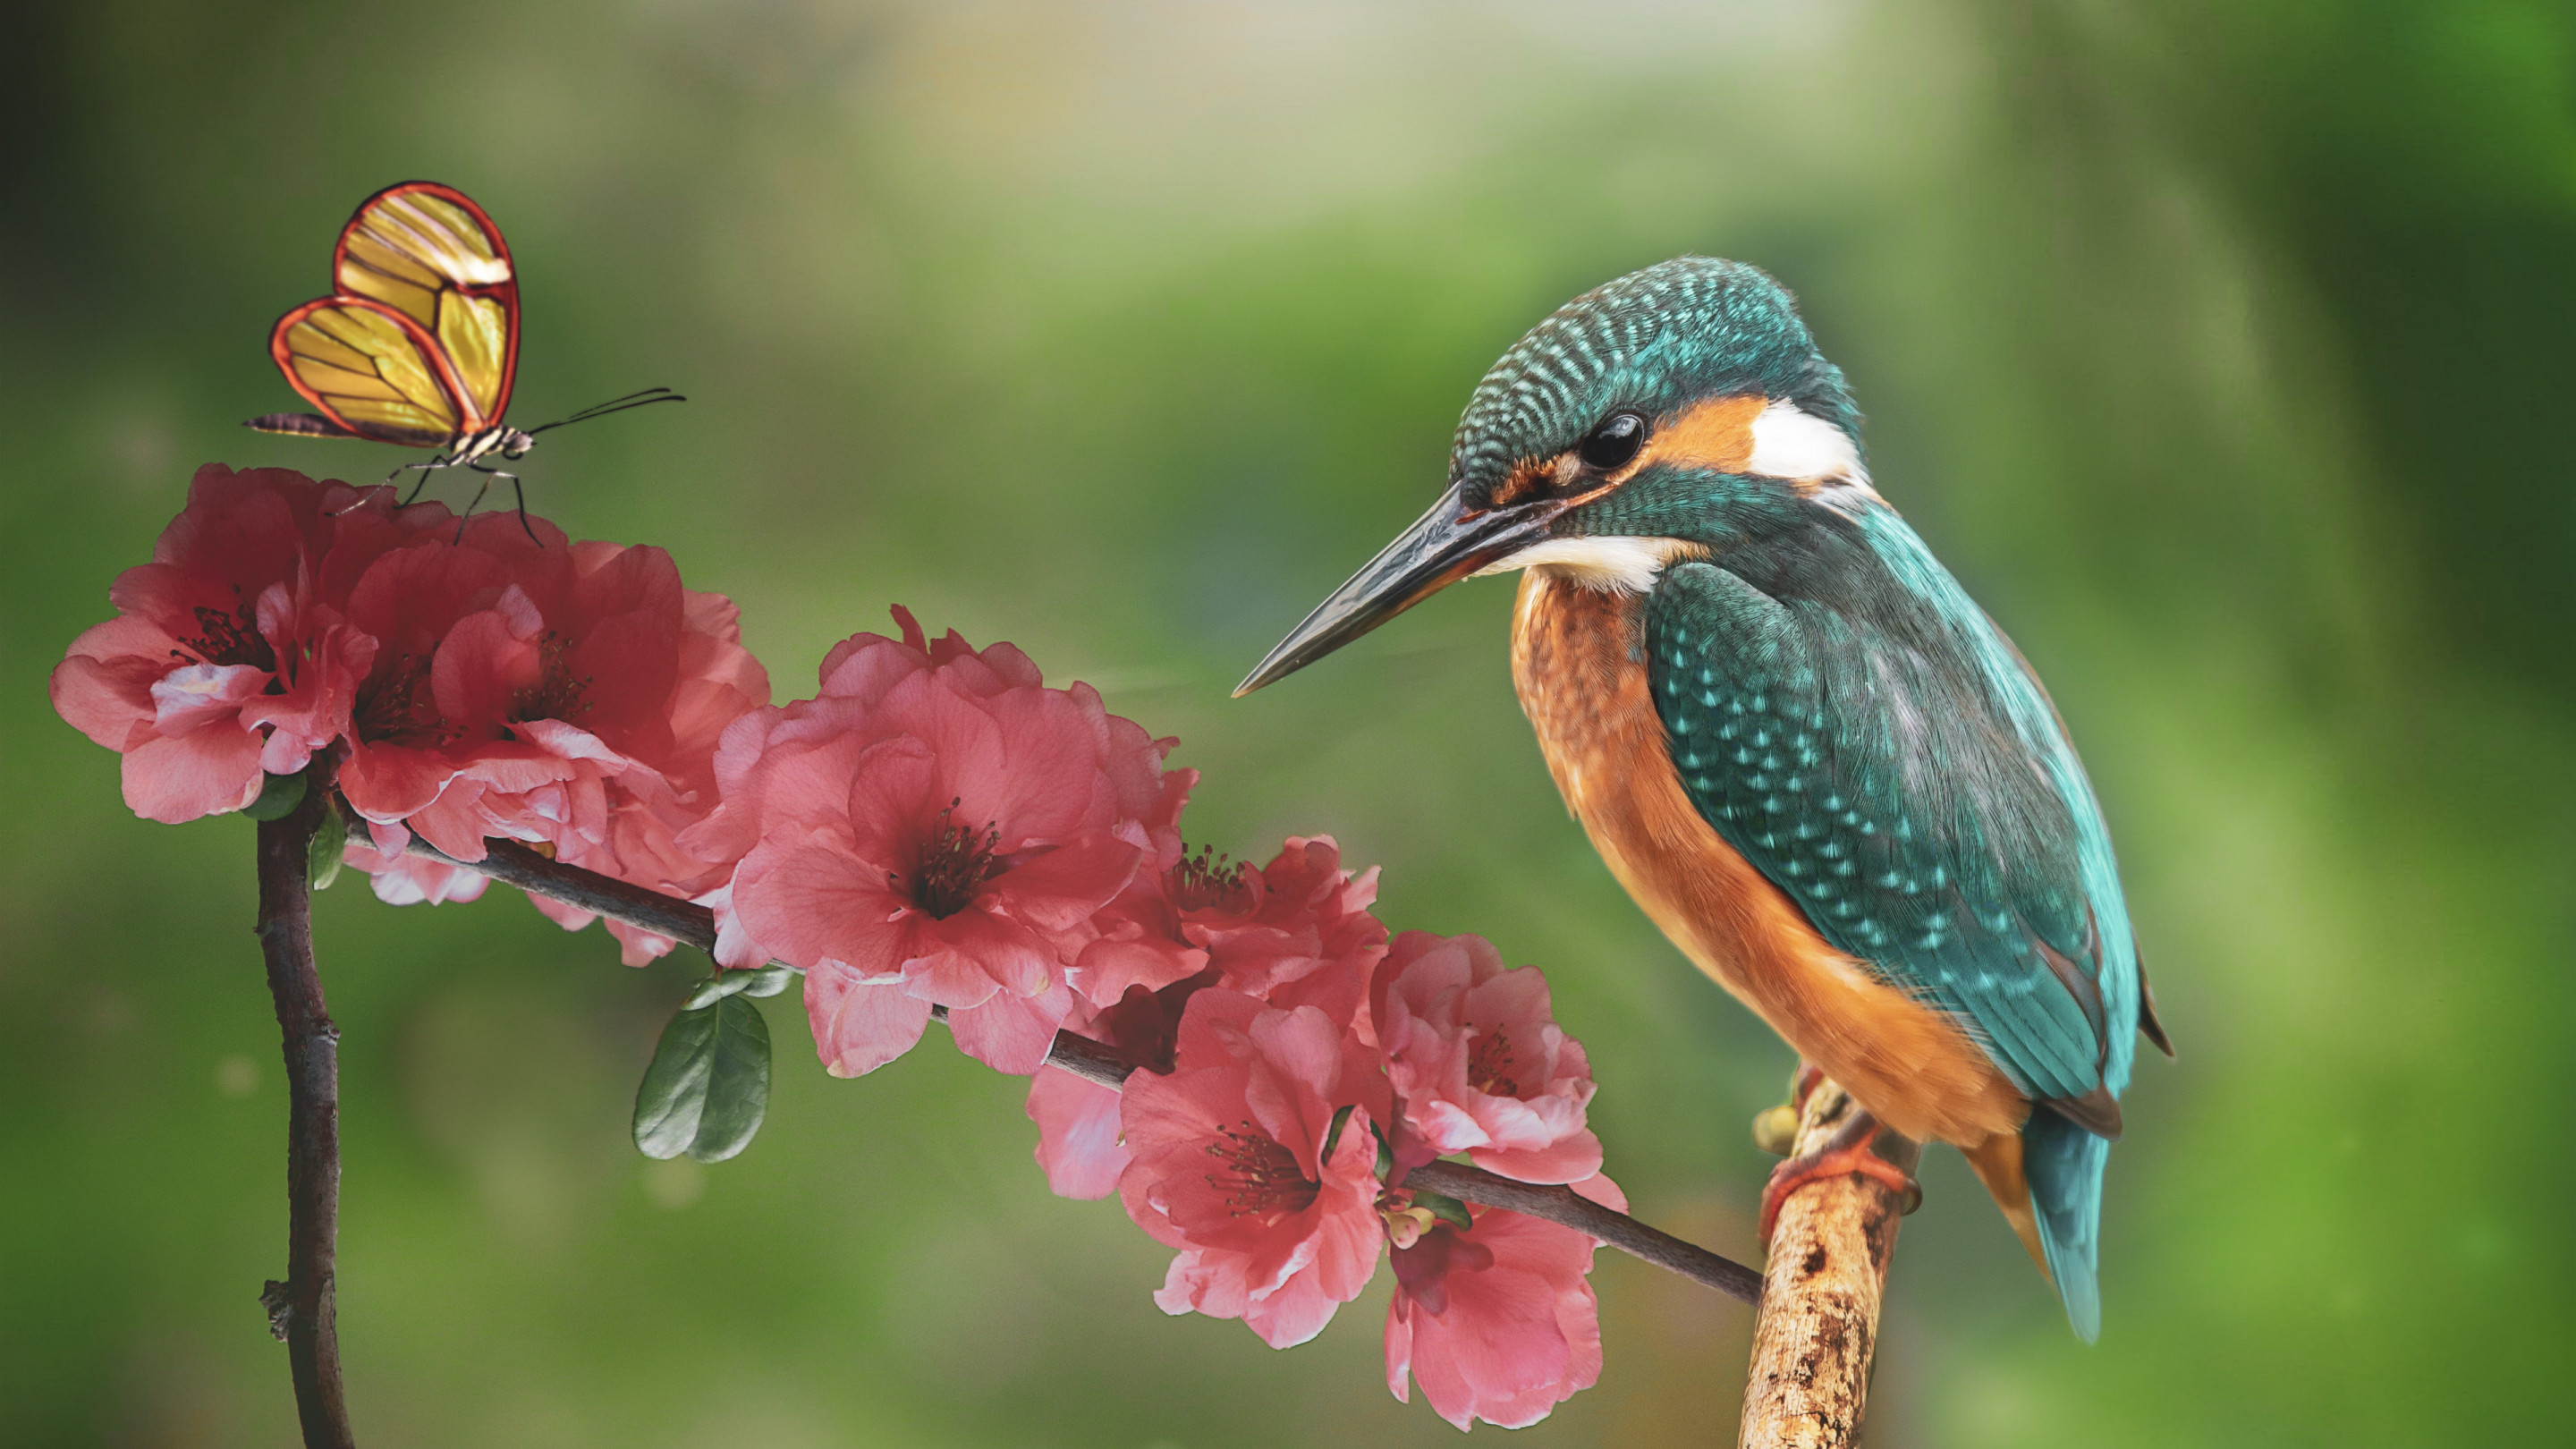 Kingfisher and the butterfly wallpaper 2880x1620